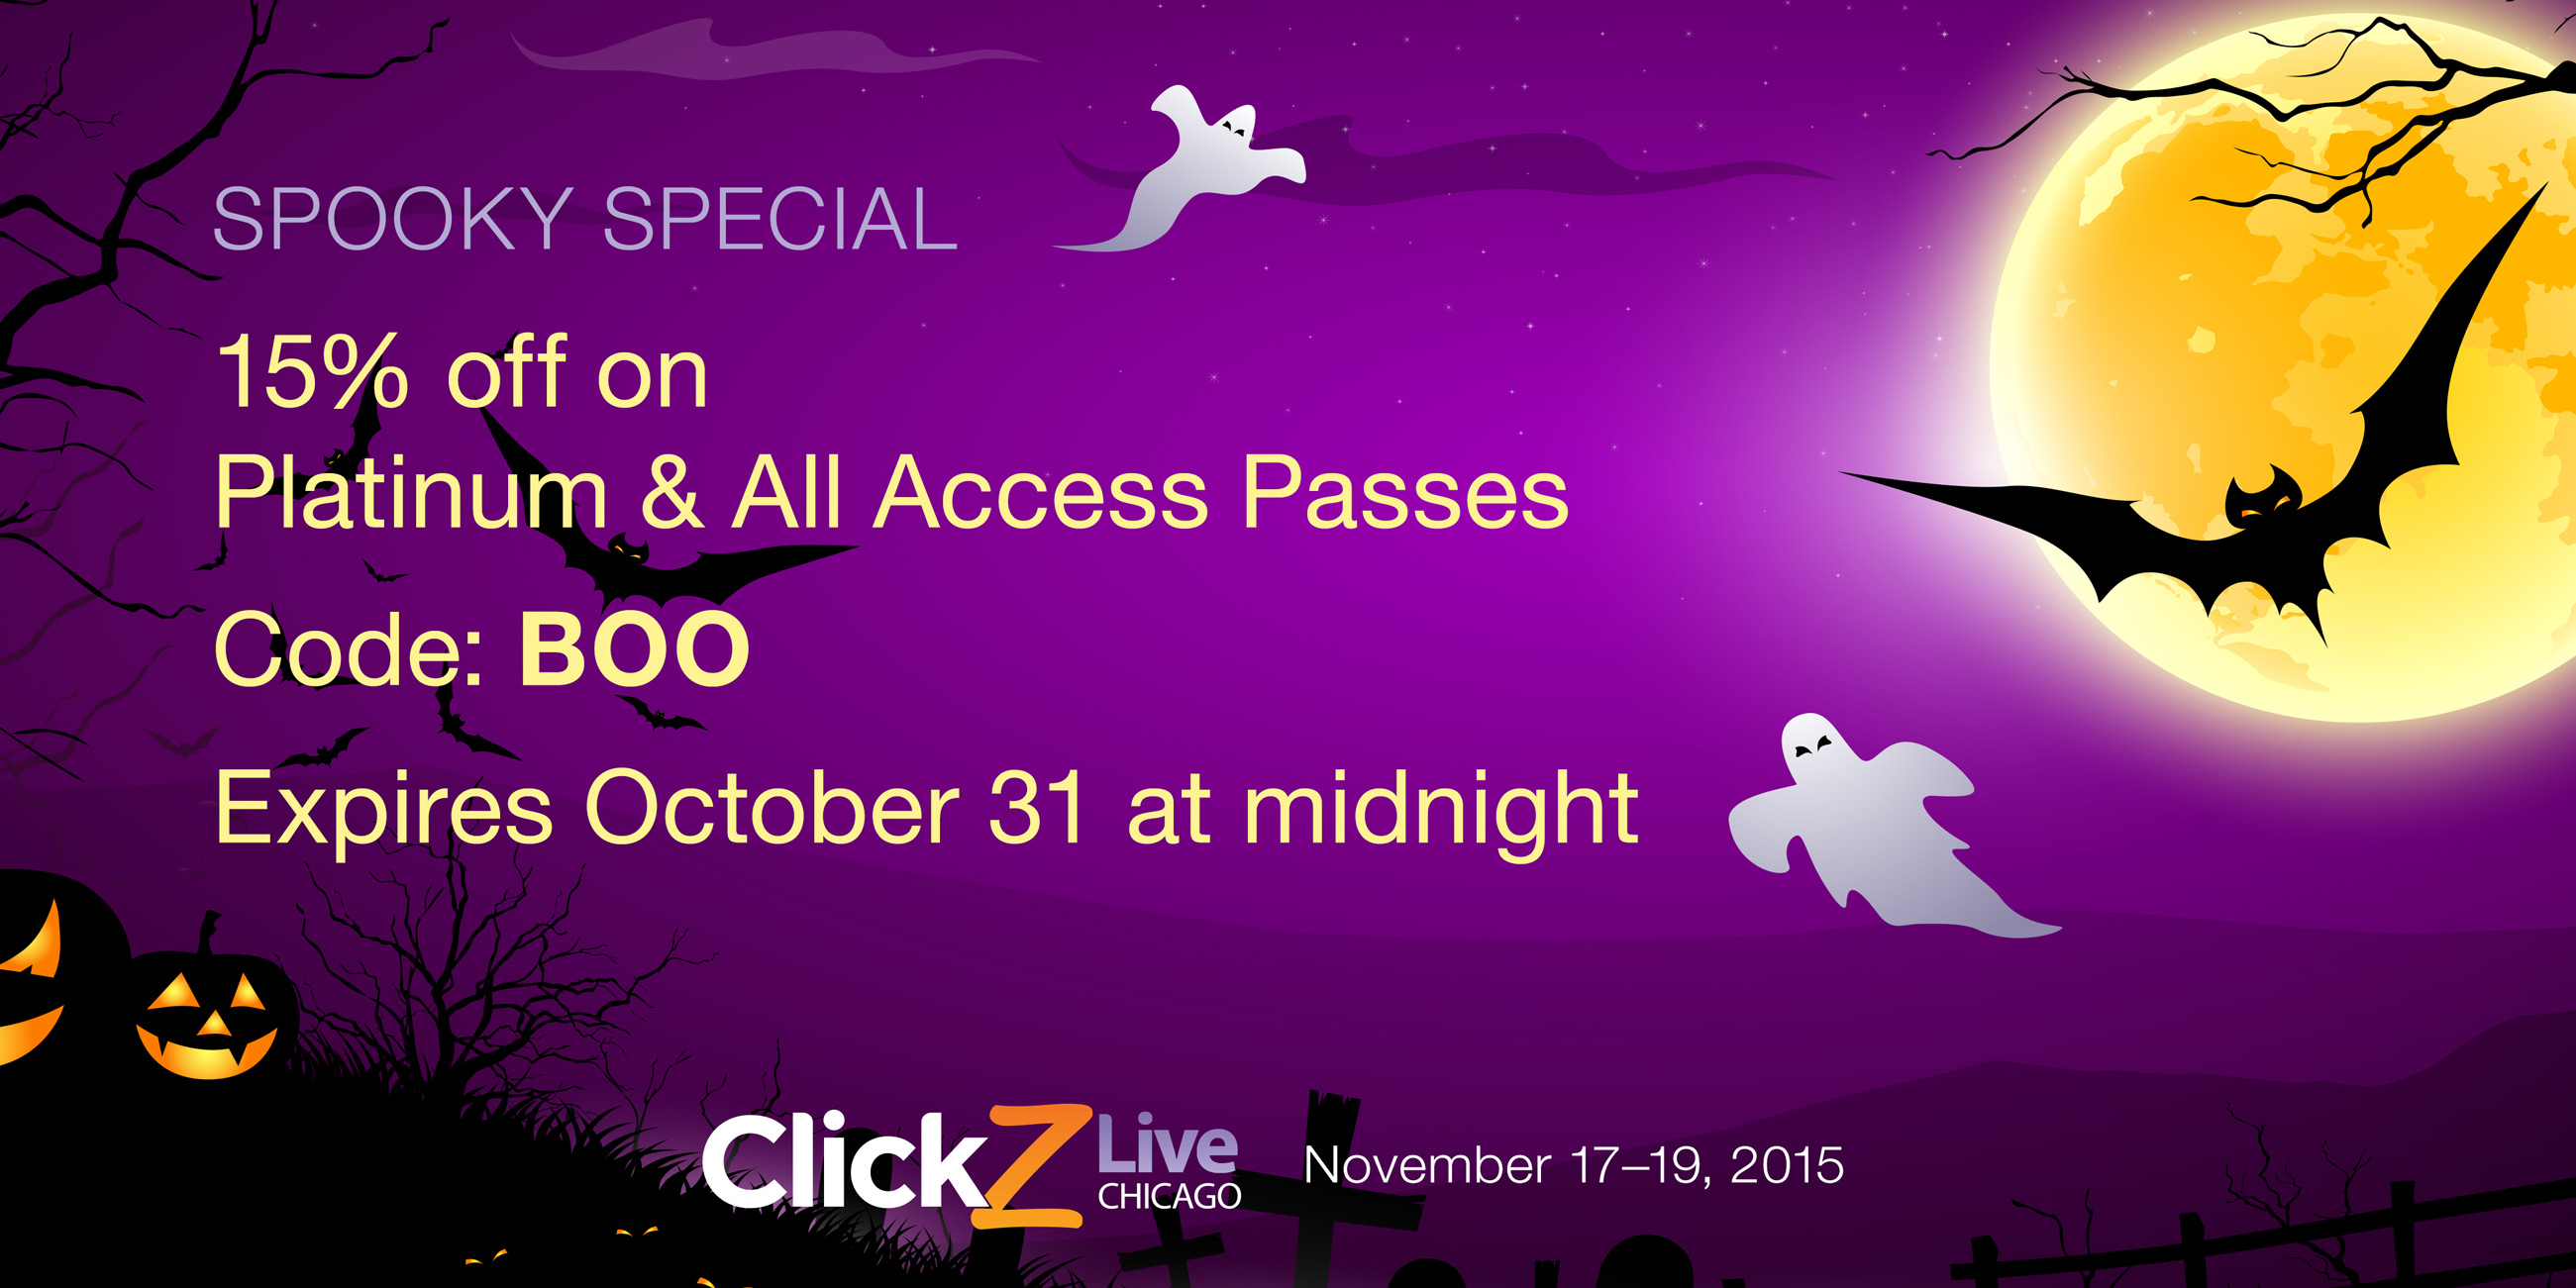 Display ad and social media image at 2:1 ratio for the ClickZ Conference in  Chicago, promoting a discount for Halloween. The image is an illustration of a graveyard at night, with a purple sky, large yellow moon, bats, jack-o'-lanterns, trees, and grave markers. The text is lavender and yellow.